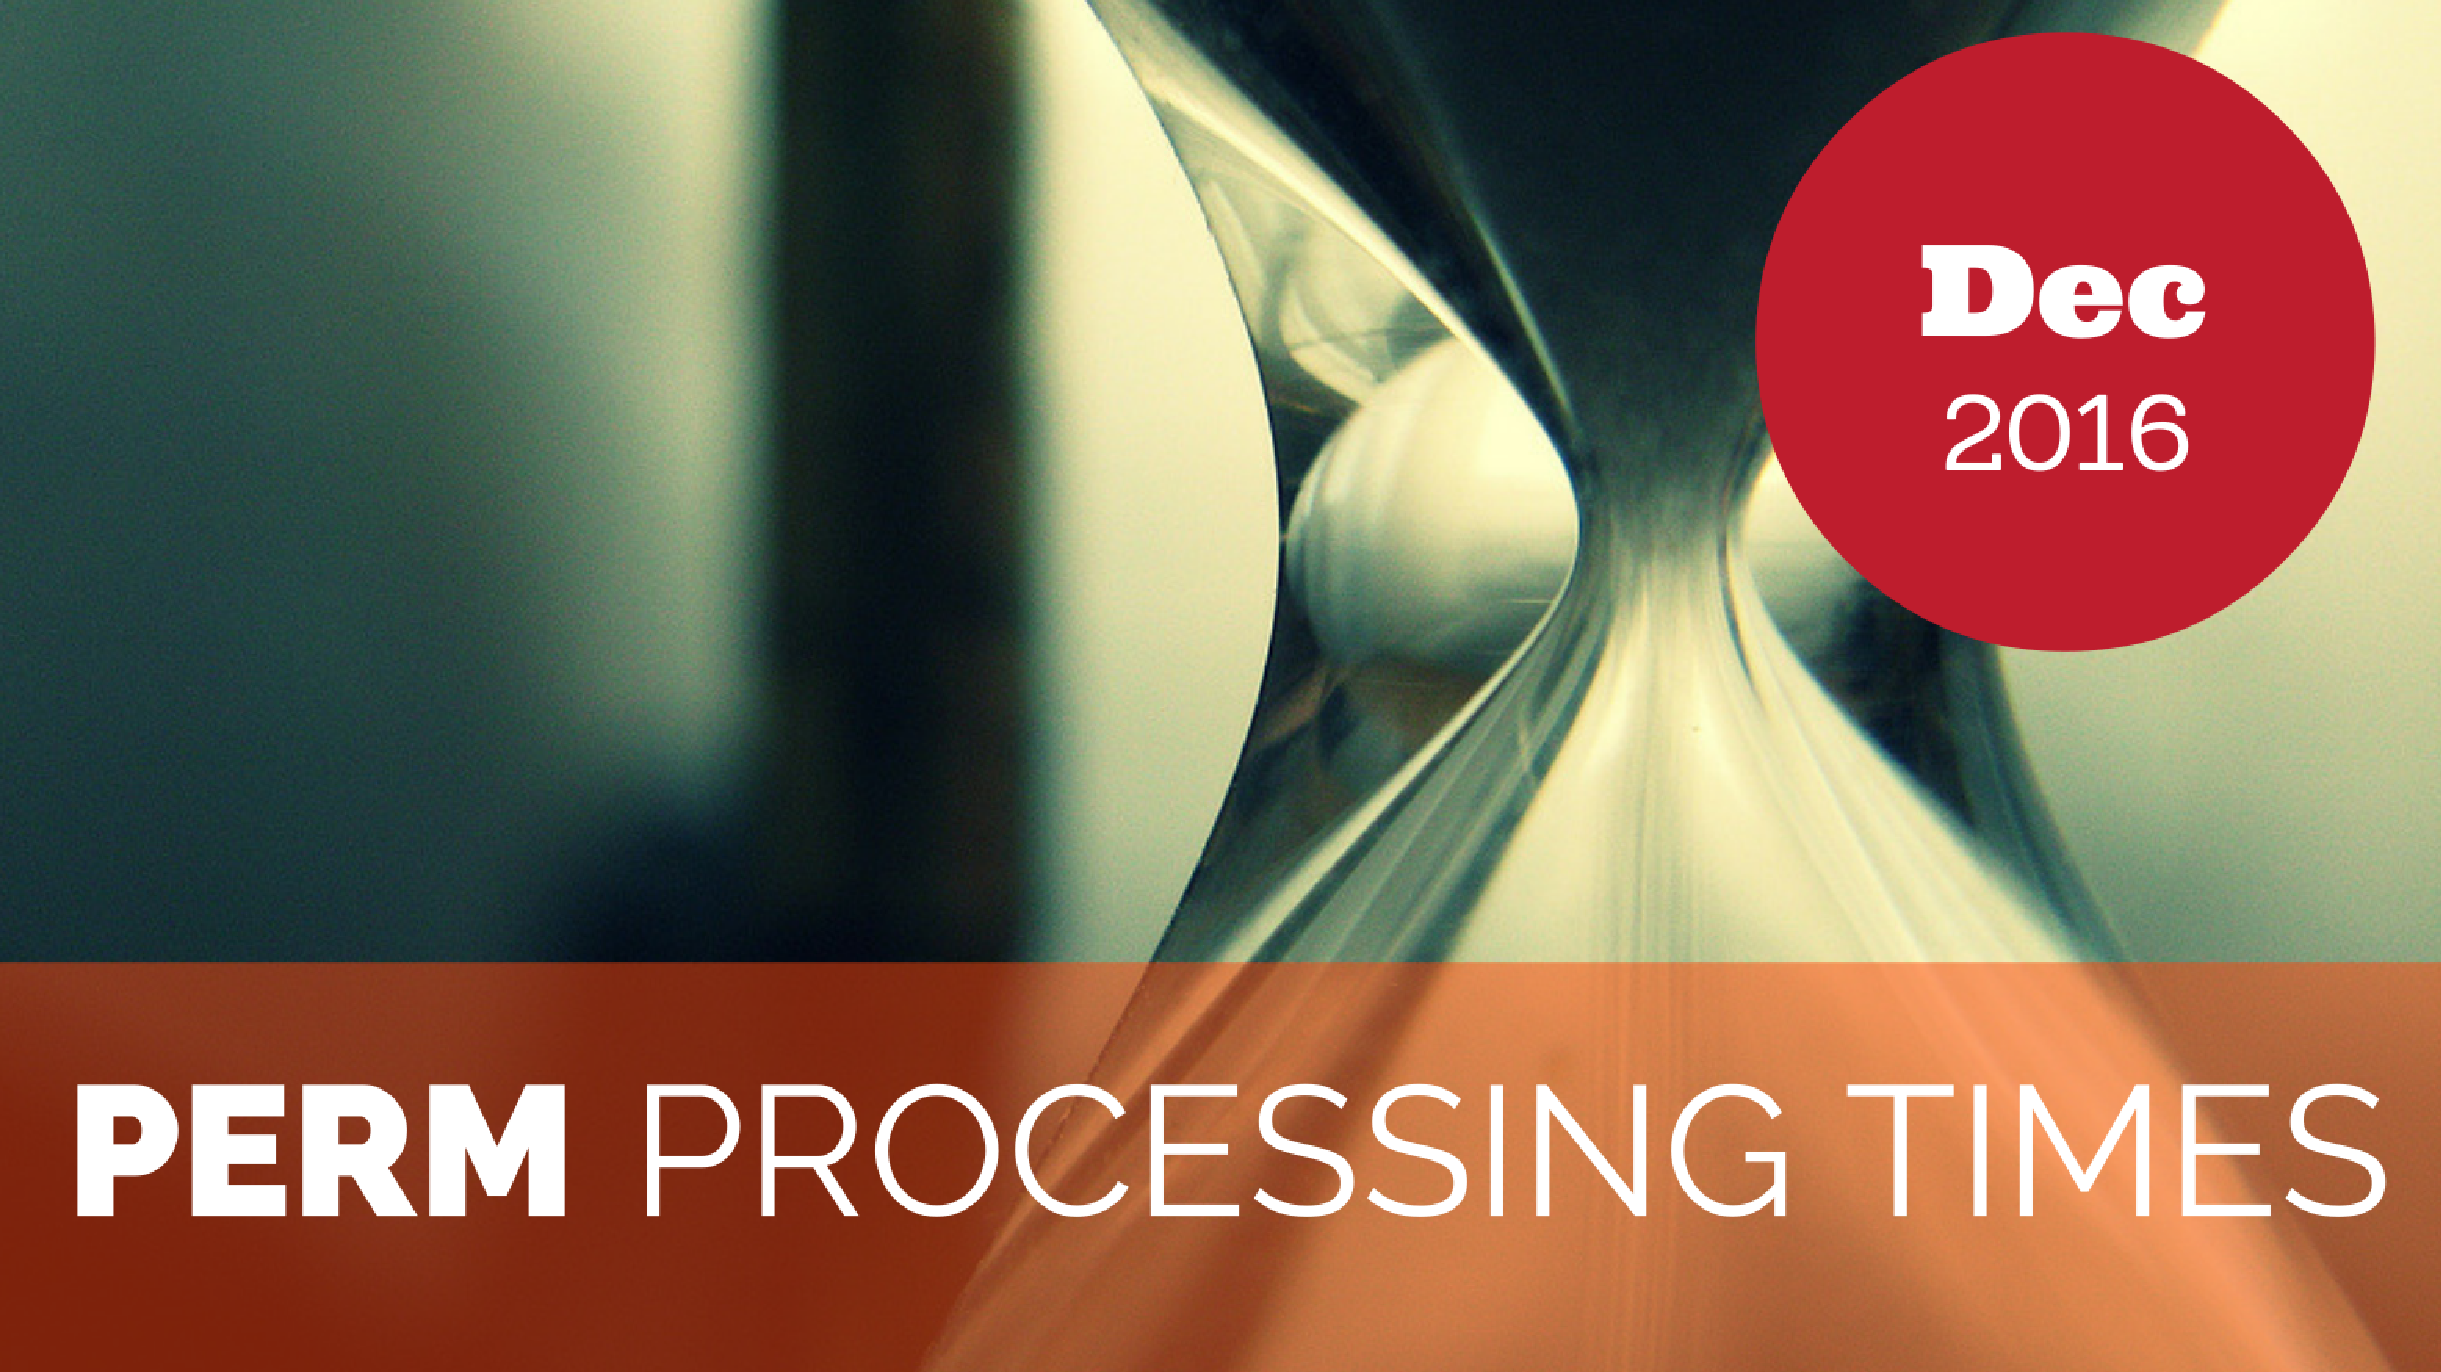 PERM Processing Times December 2016